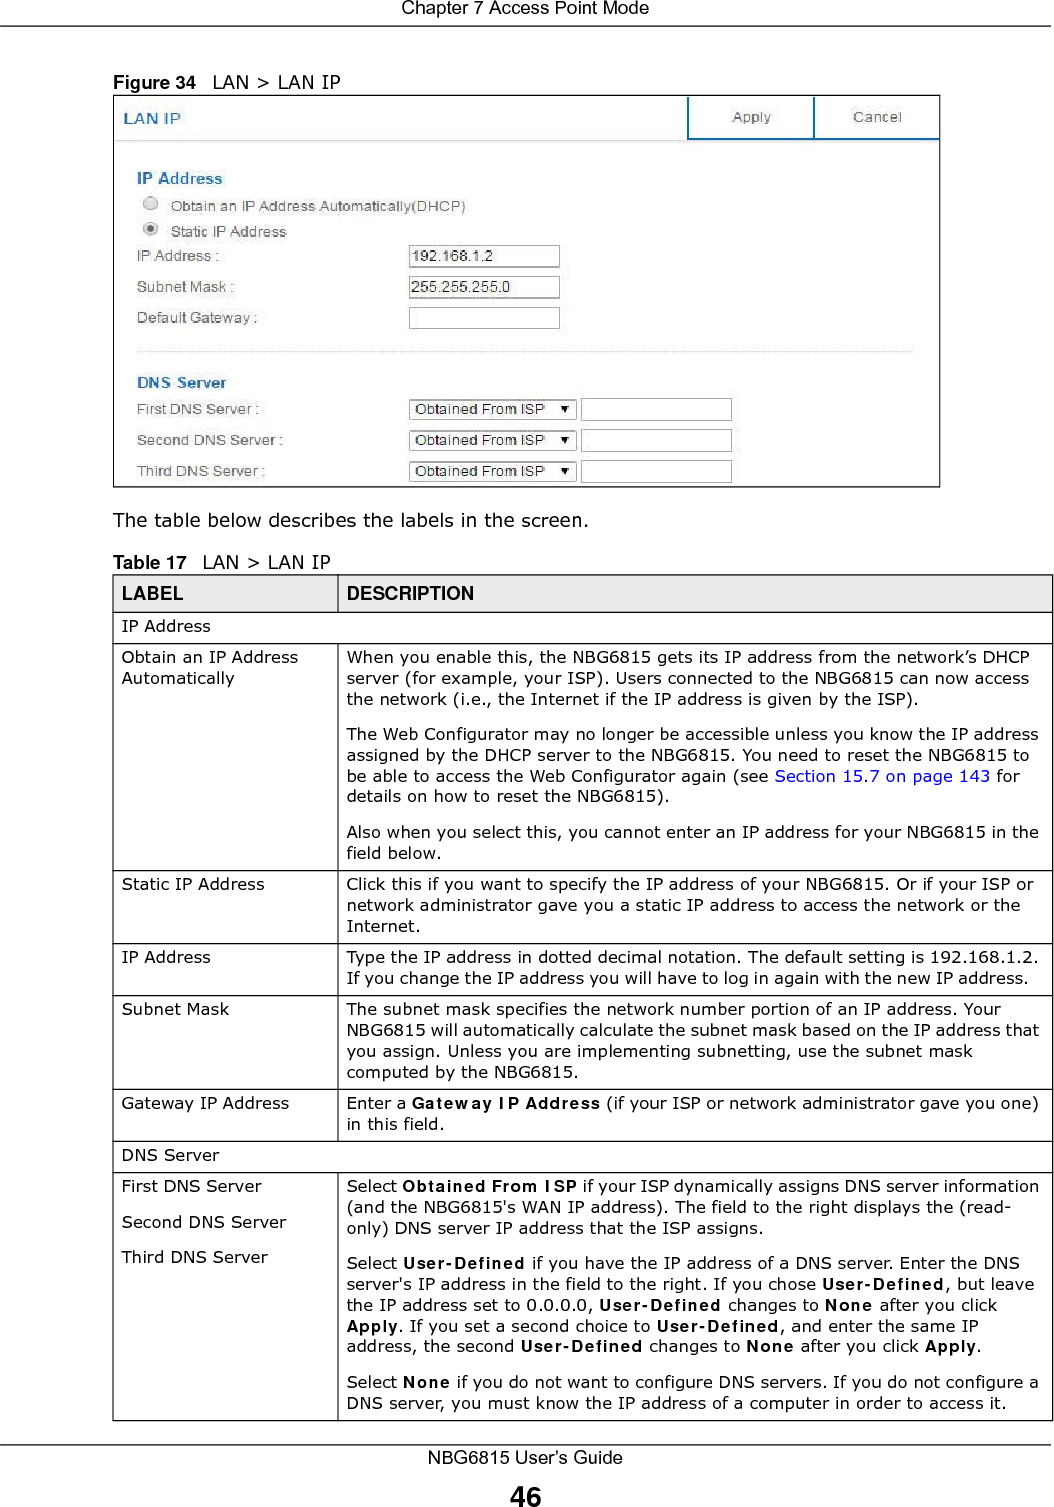 Chapter 7 Access Point ModeNBG6815 User’s Guide46Figure 34   LAN &gt; LAN IP   The table below describes the labels in the screen.Table 17   LAN &gt; LAN IPLABEL DESCRIPTIONIP AddressObtain an IP Address AutomaticallyWhen you enable this, the NBG6815 gets its IP address from the network’s DHCP server (for example, your ISP). Users connected to the NBG6815 can now access the network (i.e., the Internet if the IP address is given by the ISP).The Web Configurator may no longer be accessible unless you know the IP address assigned by the DHCP server to the NBG6815. You need to reset the NBG6815 to be able to access the Web Configurator again (see Section 15.7 on page 143 for details on how to reset the NBG6815).Also when you select this, you cannot enter an IP address for your NBG6815 in the field below.Static IP Address Click this if you want to specify the IP address of your NBG6815. Or if your ISP or network administrator gave you a static IP address to access the network or the Internet.IP Address Type the IP address in dotted decimal notation. The default setting is 192.168.1.2. If you change the IP address you will have to log in again with the new IP address.   Subnet Mask The subnet mask specifies the network number portion of an IP address. Your NBG6815 will automatically calculate the subnet mask based on the IP address that you assign. Unless you are implementing subnetting, use the subnet mask computed by the NBG6815.Gateway IP Address Enter a Gateway IP Address (if your ISP or network administrator gave you one) in this field.DNS ServerFirst DNS ServerSecond DNS ServerThird DNS Server Select Obtained From ISP if your ISP dynamically assigns DNS server information (and the NBG6815&apos;s WAN IP address). The field to the right displays the (read-only) DNS server IP address that the ISP assigns. Select User-Defined if you have the IP address of a DNS server. Enter the DNS server&apos;s IP address in the field to the right. If you chose User-Defined, but leave the IP address set to 0.0.0.0, User-Defined changes to None after you click Apply. If you set a second choice to User-Defined, and enter the same IP address, the second User-Defined changes to None after you click Apply. Select None if you do not want to configure DNS servers. If you do not configure a DNS server, you must know the IP address of a computer in order to access it.